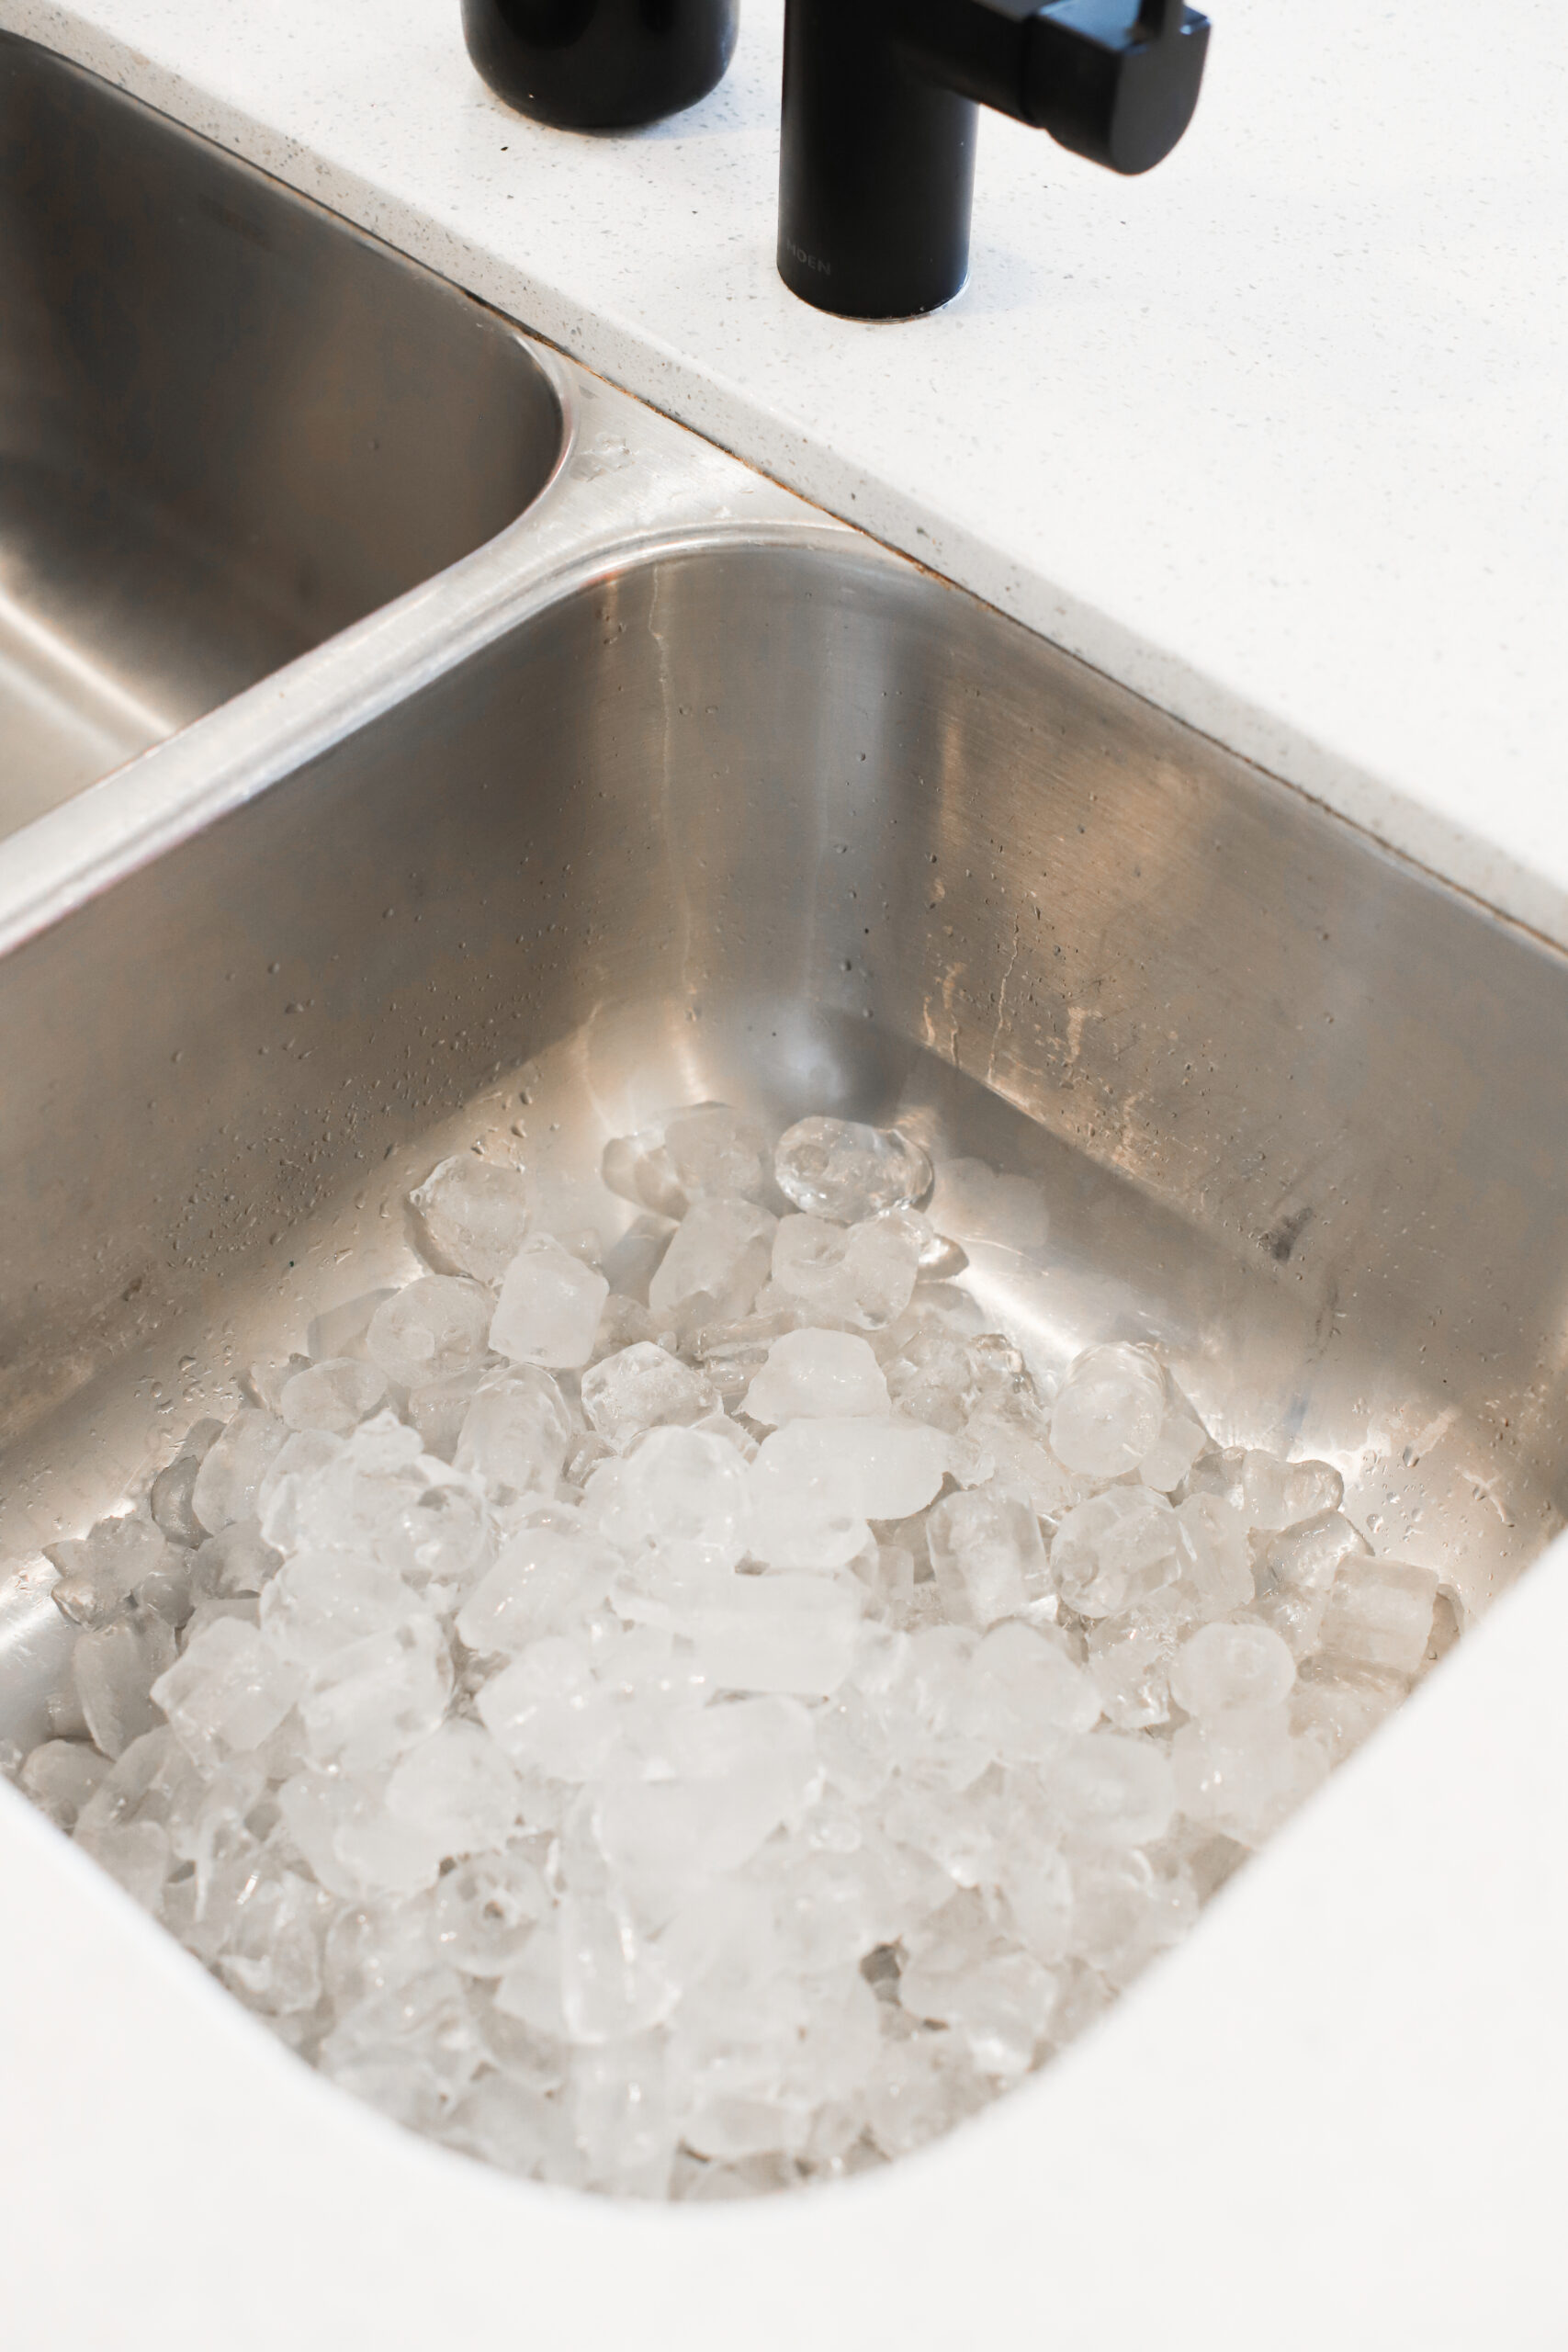 pour ice into your garbage disposal to clean out the grime